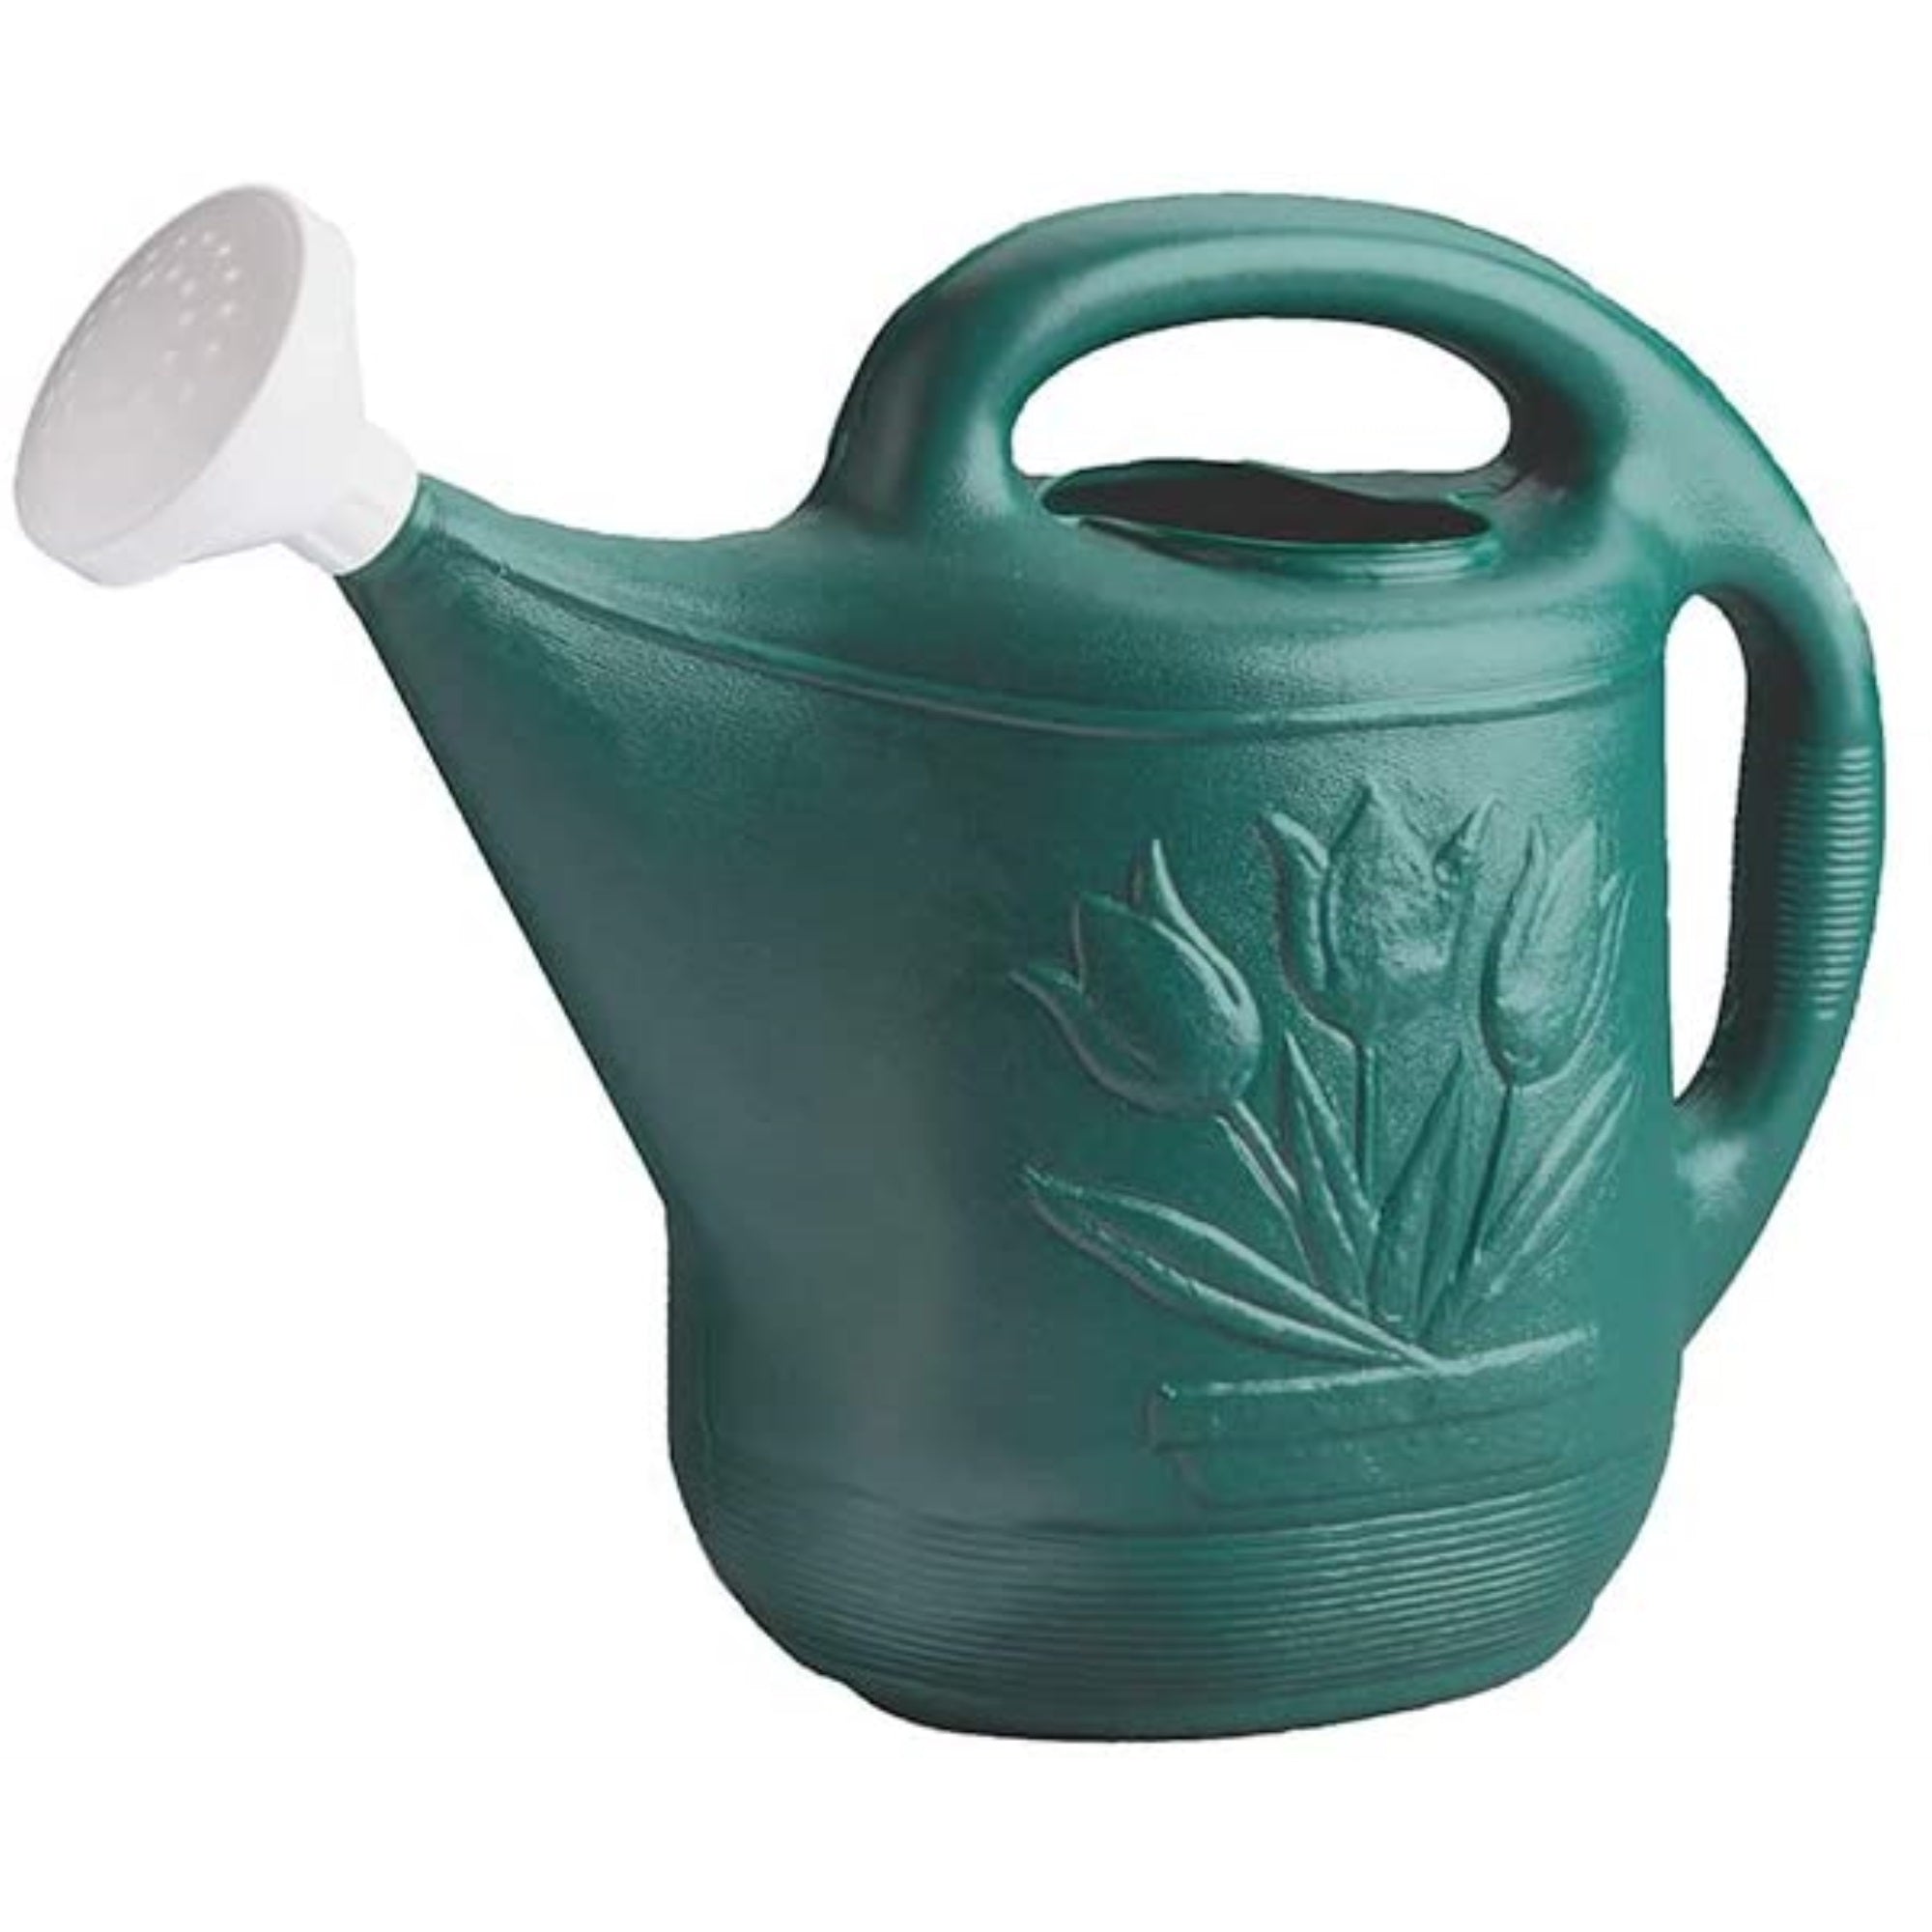 Novelty Classic Plastic Watering Can, Classic Version, Green, 2 Gallon Capacity